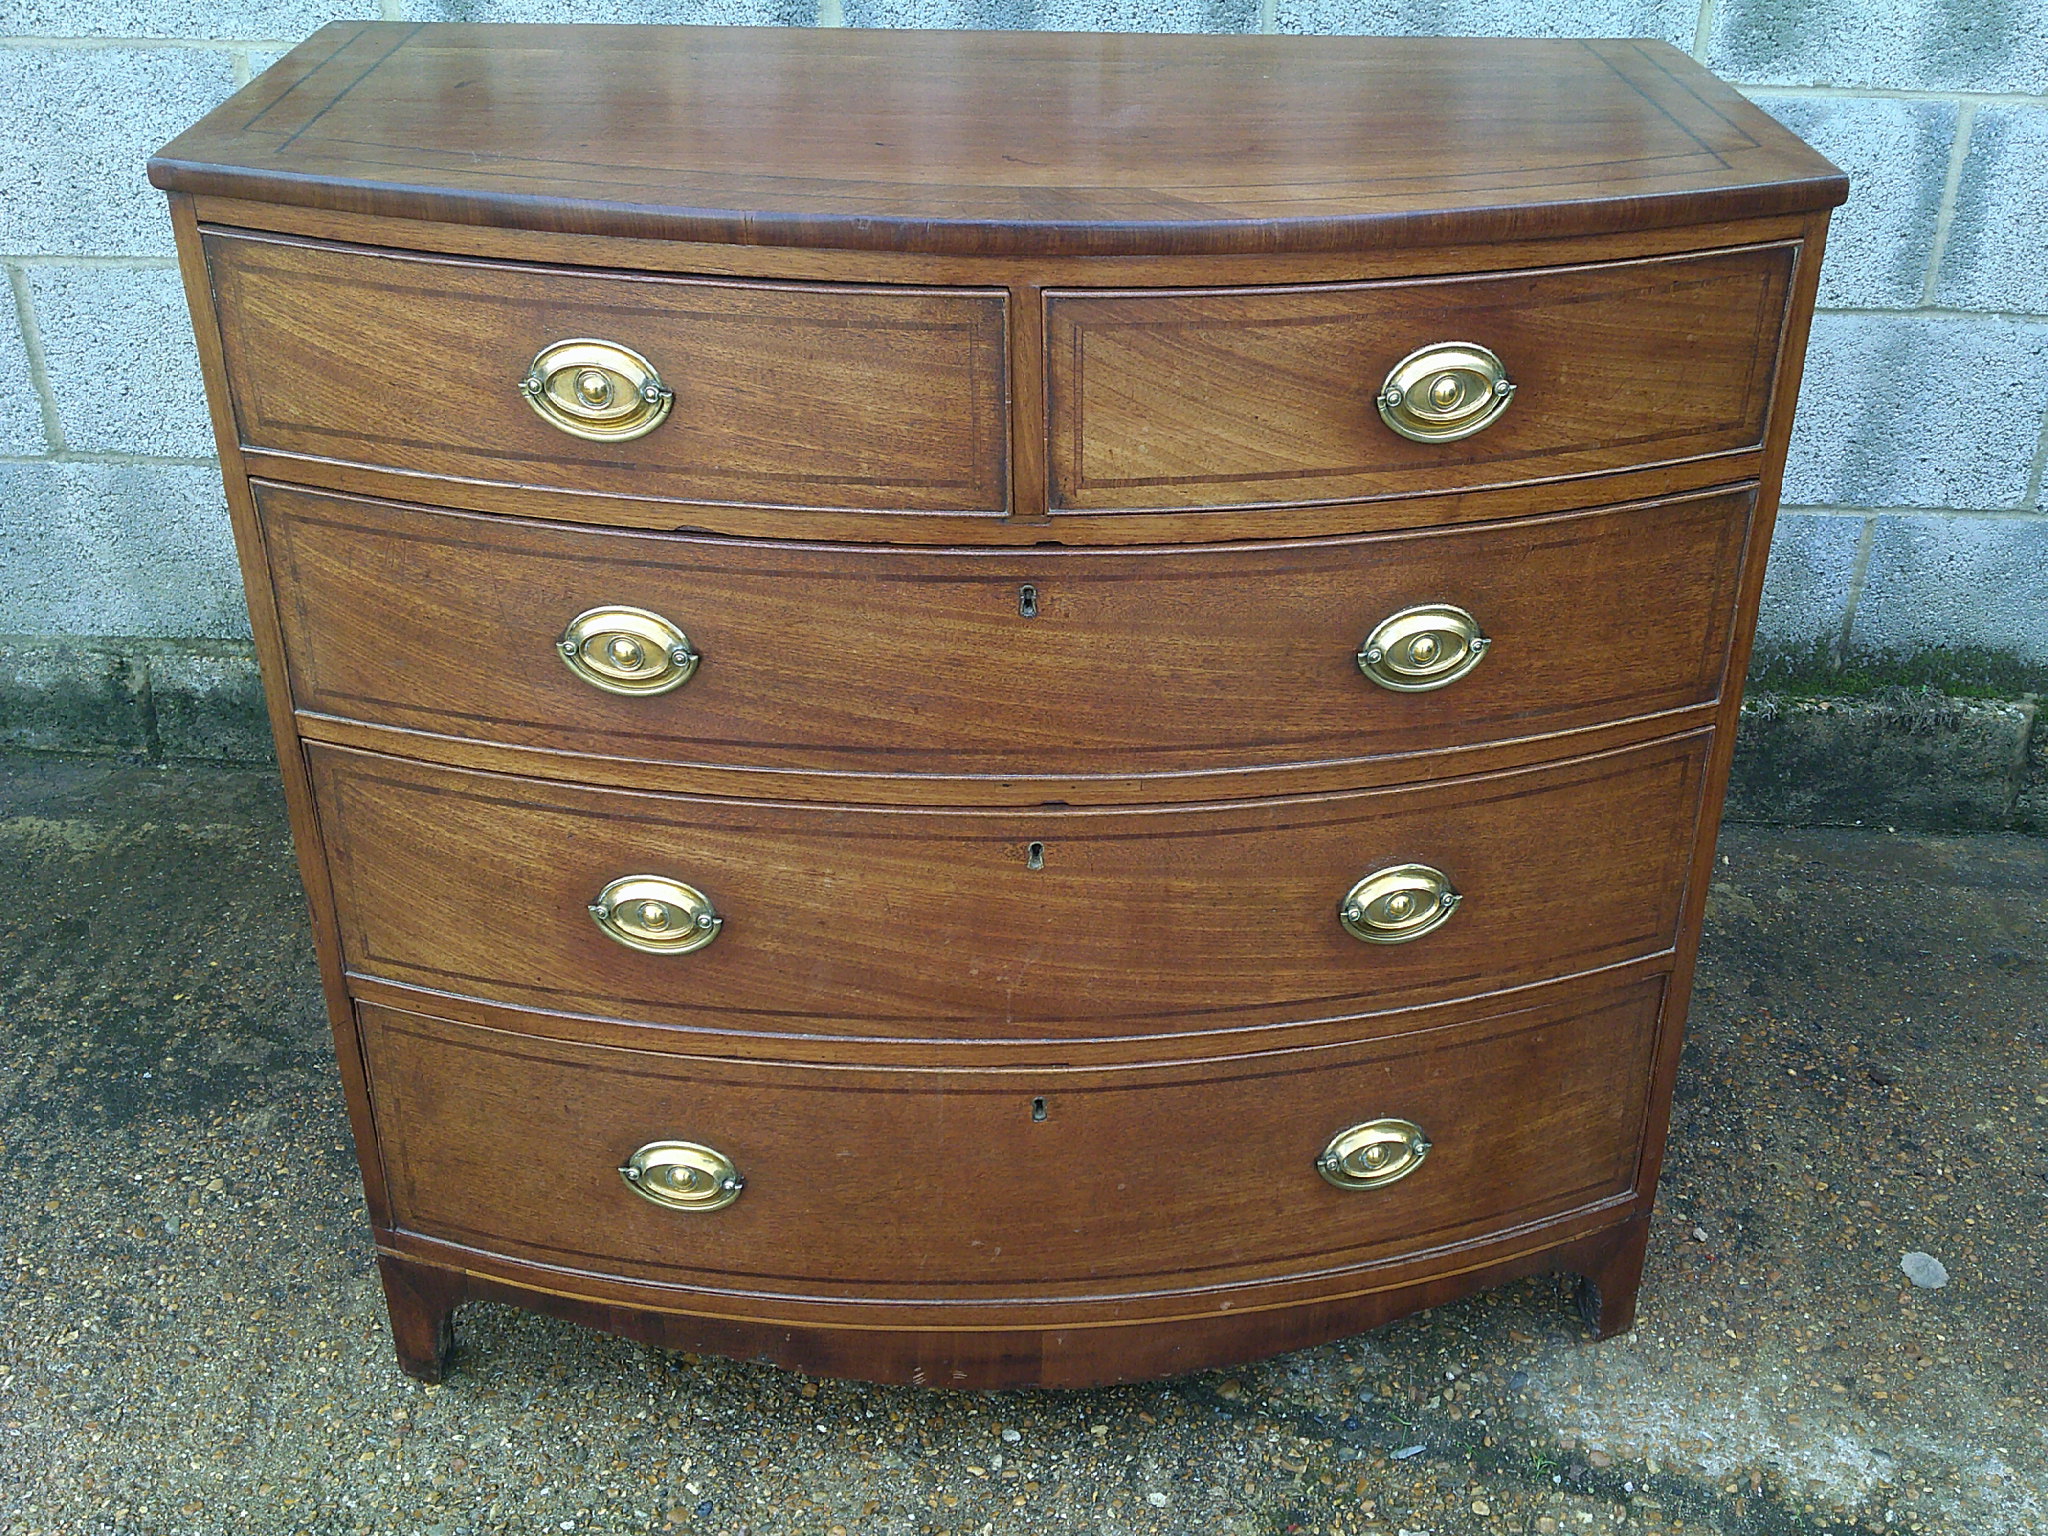 ANTIQUE REGENCY CROSSBOUND BOWFRONT CHEST OF DRAWERS